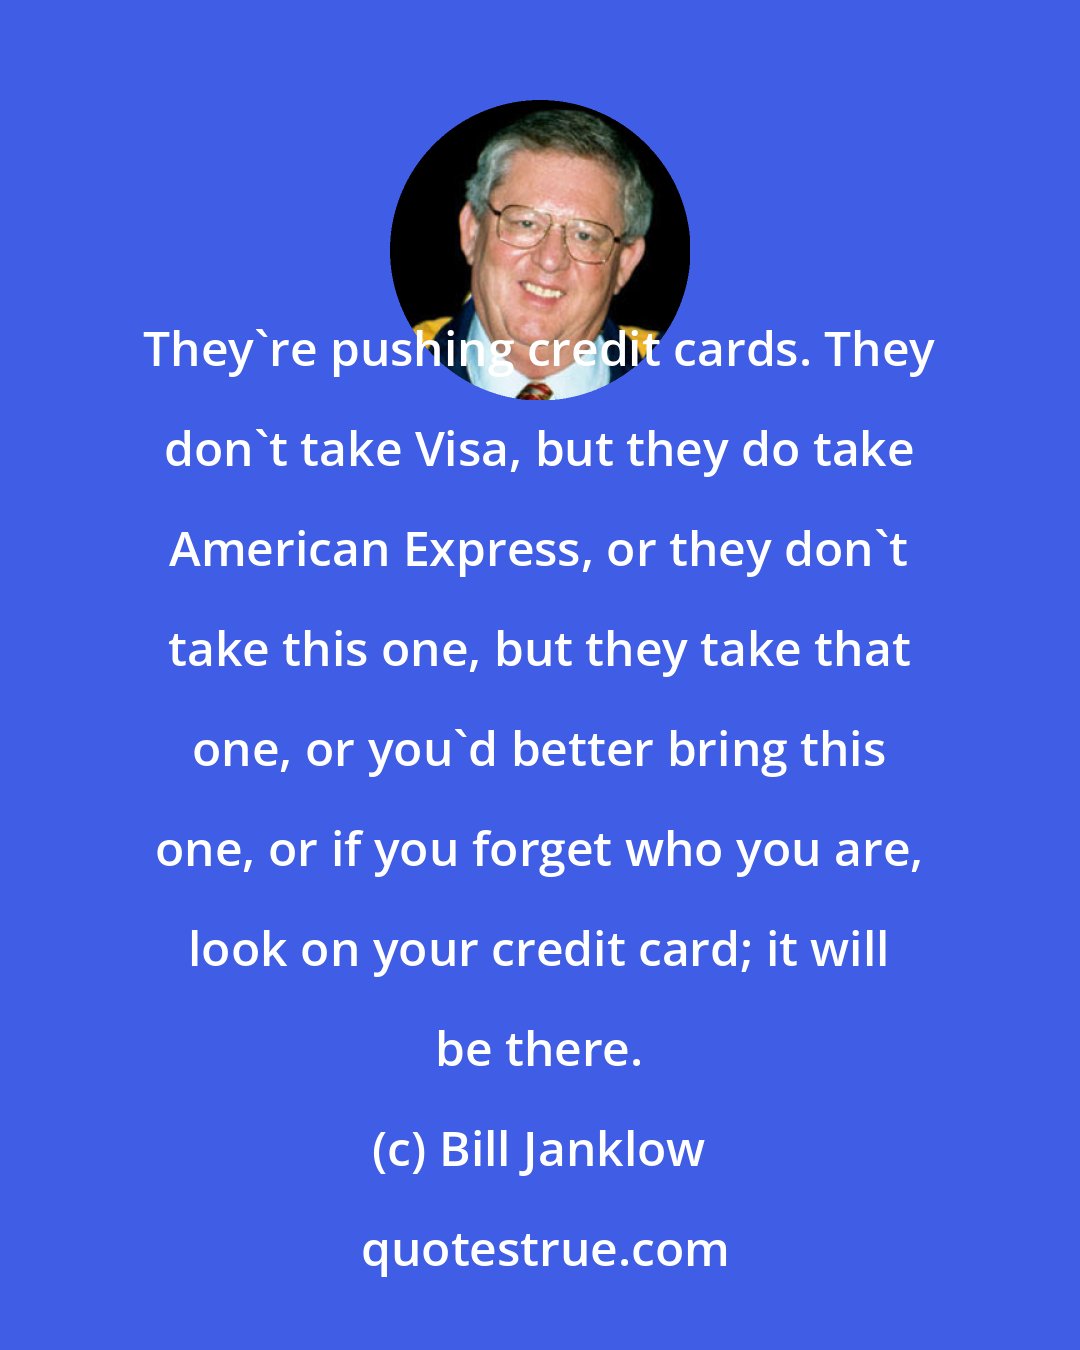 Bill Janklow: They're pushing credit cards. They don't take Visa, but they do take American Express, or they don't take this one, but they take that one, or you'd better bring this one, or if you forget who you are, look on your credit card; it will be there.